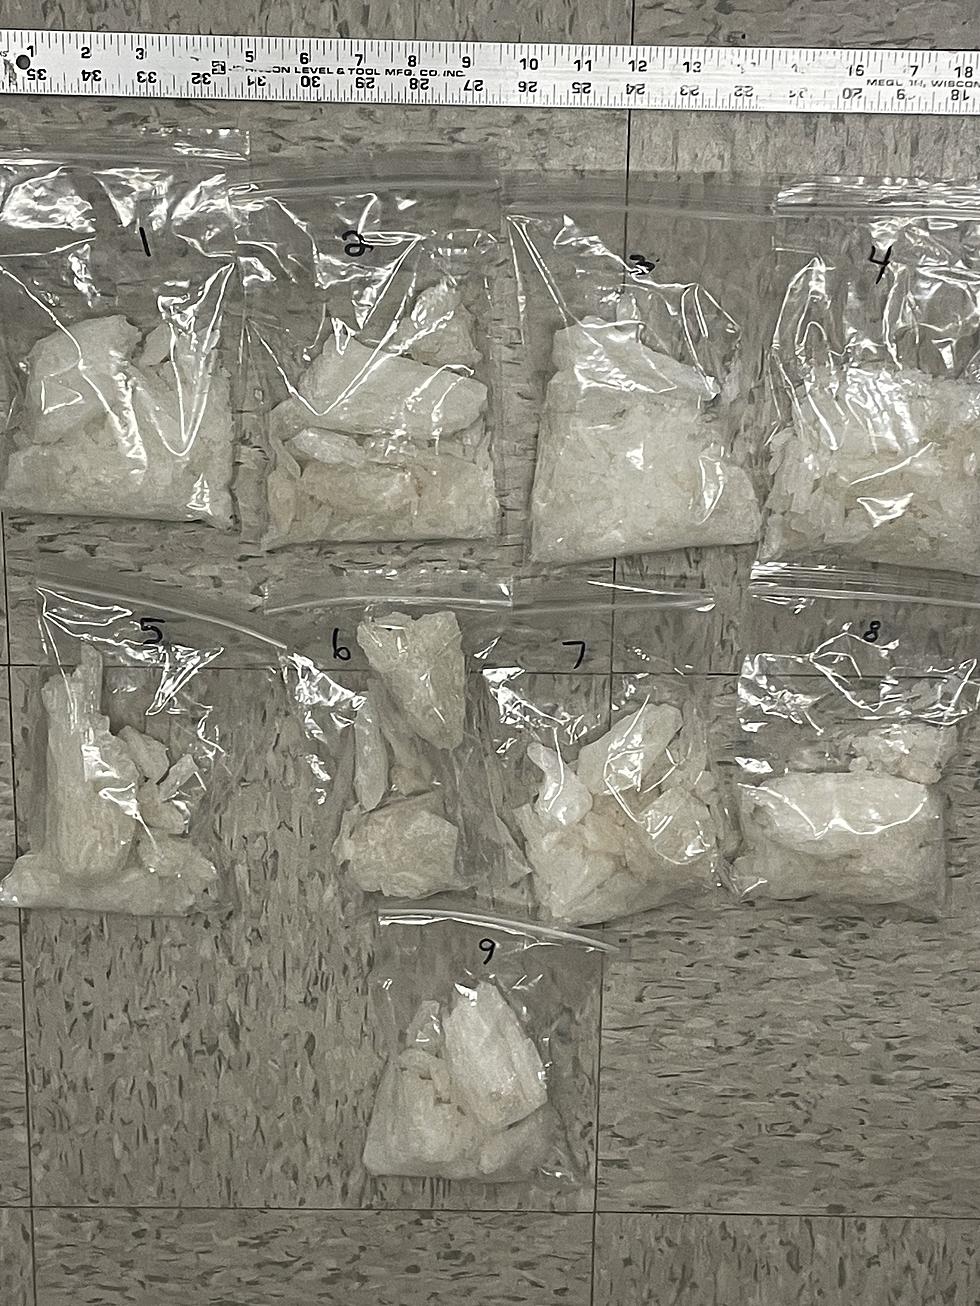 Pounds of Meth Seized in Massive Minnesota Drug Bust